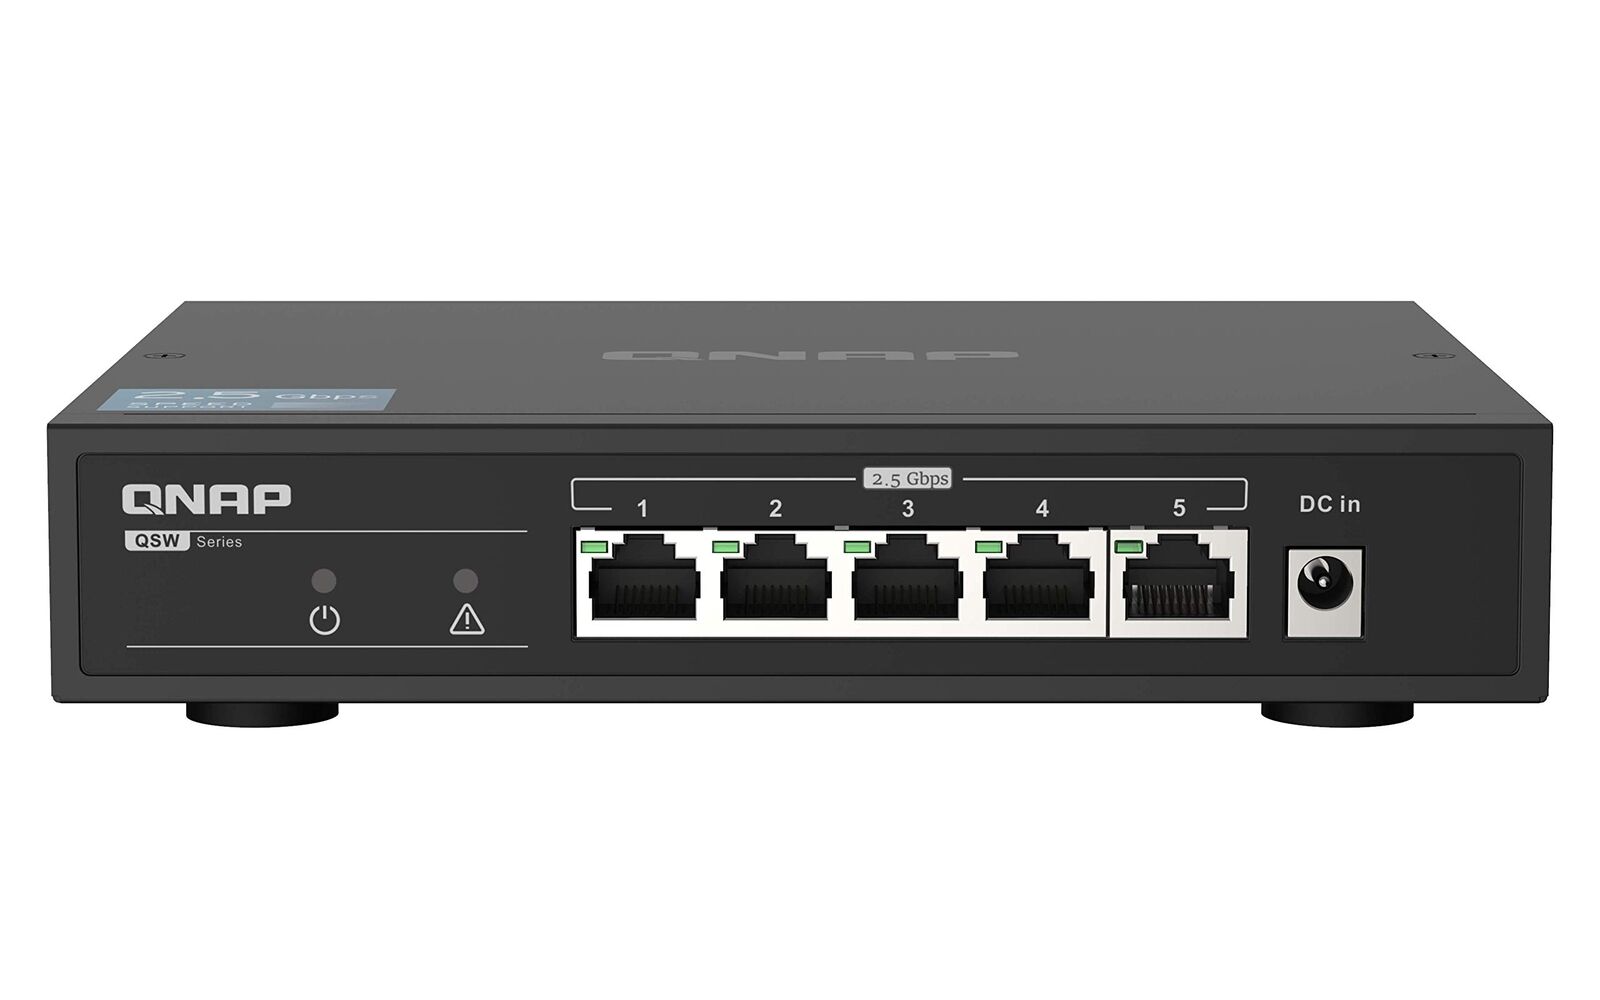 QNAP QSW-1105-5T, 5 port 2.5Gbps auto negotiation (2.5G/1G/100M), unmanaged swit